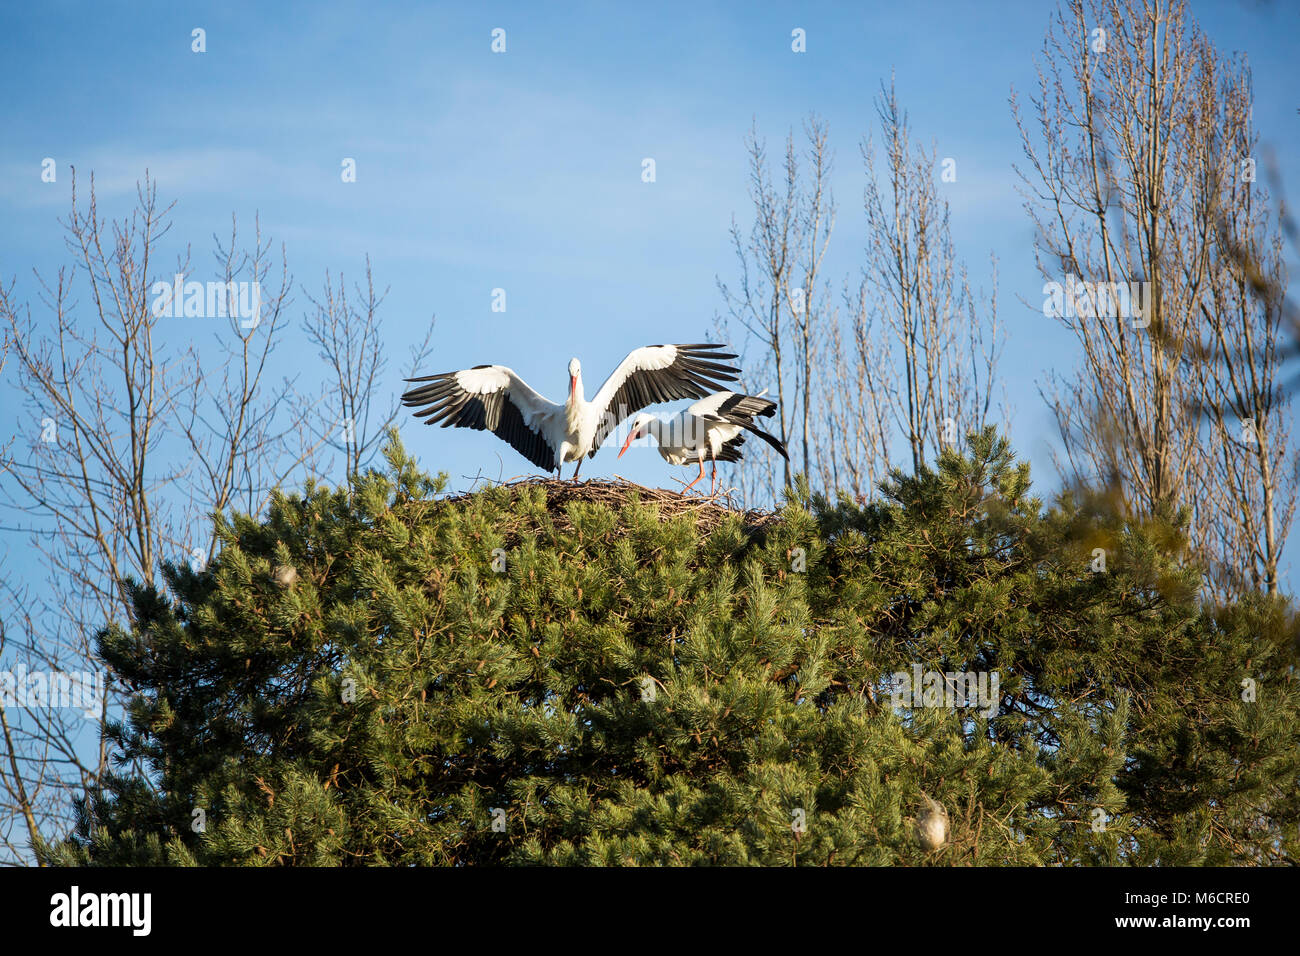 Two storks standing high up in a nest. One of them has just landed and has its wings spread. Stock Photo